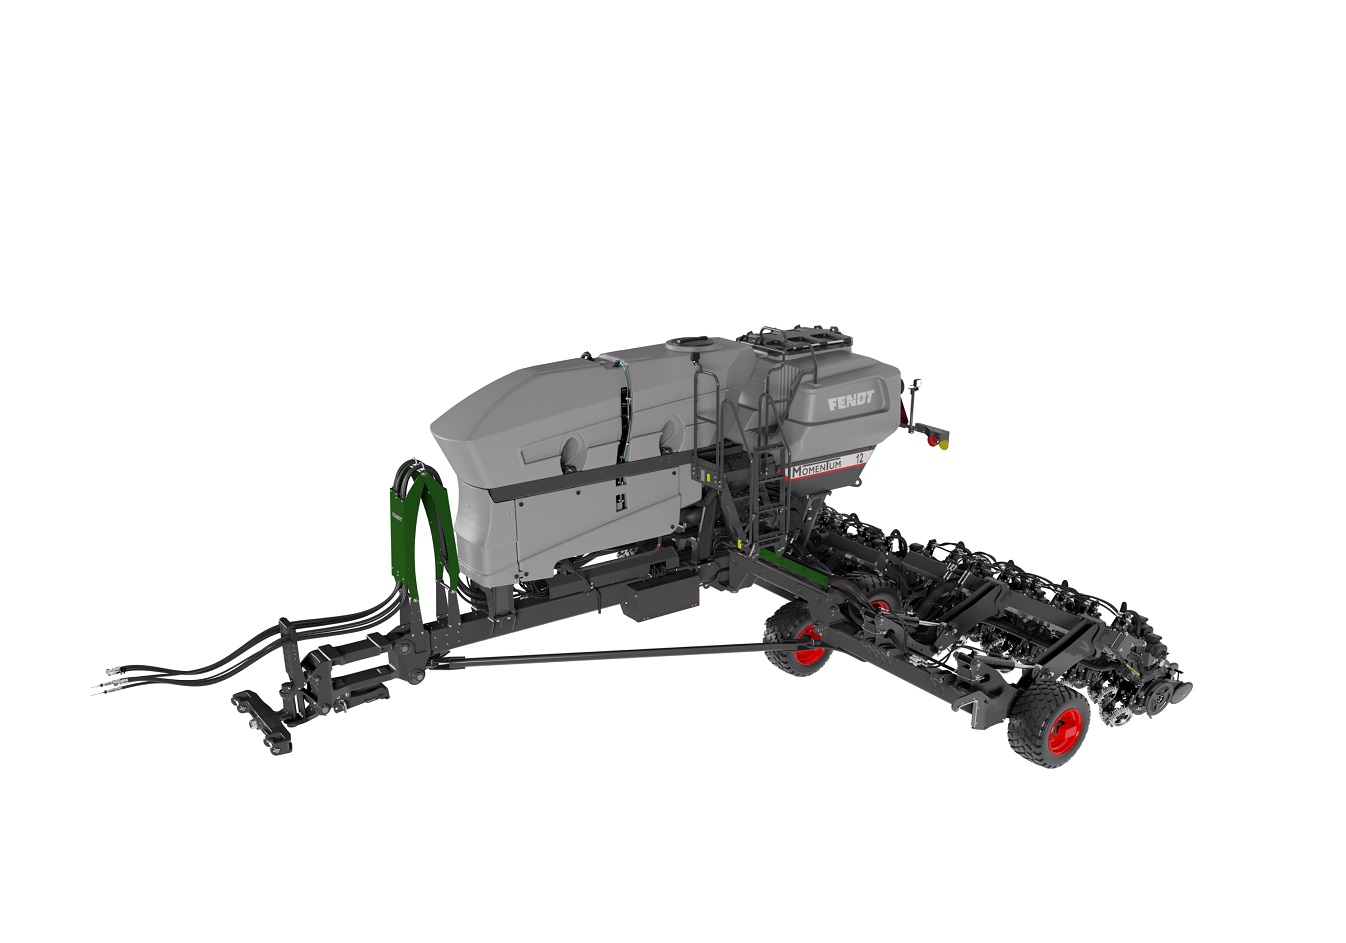 AGCO’s Fendt® Expands Award-Winning Momentum® Planter Line with 30-Foot Model